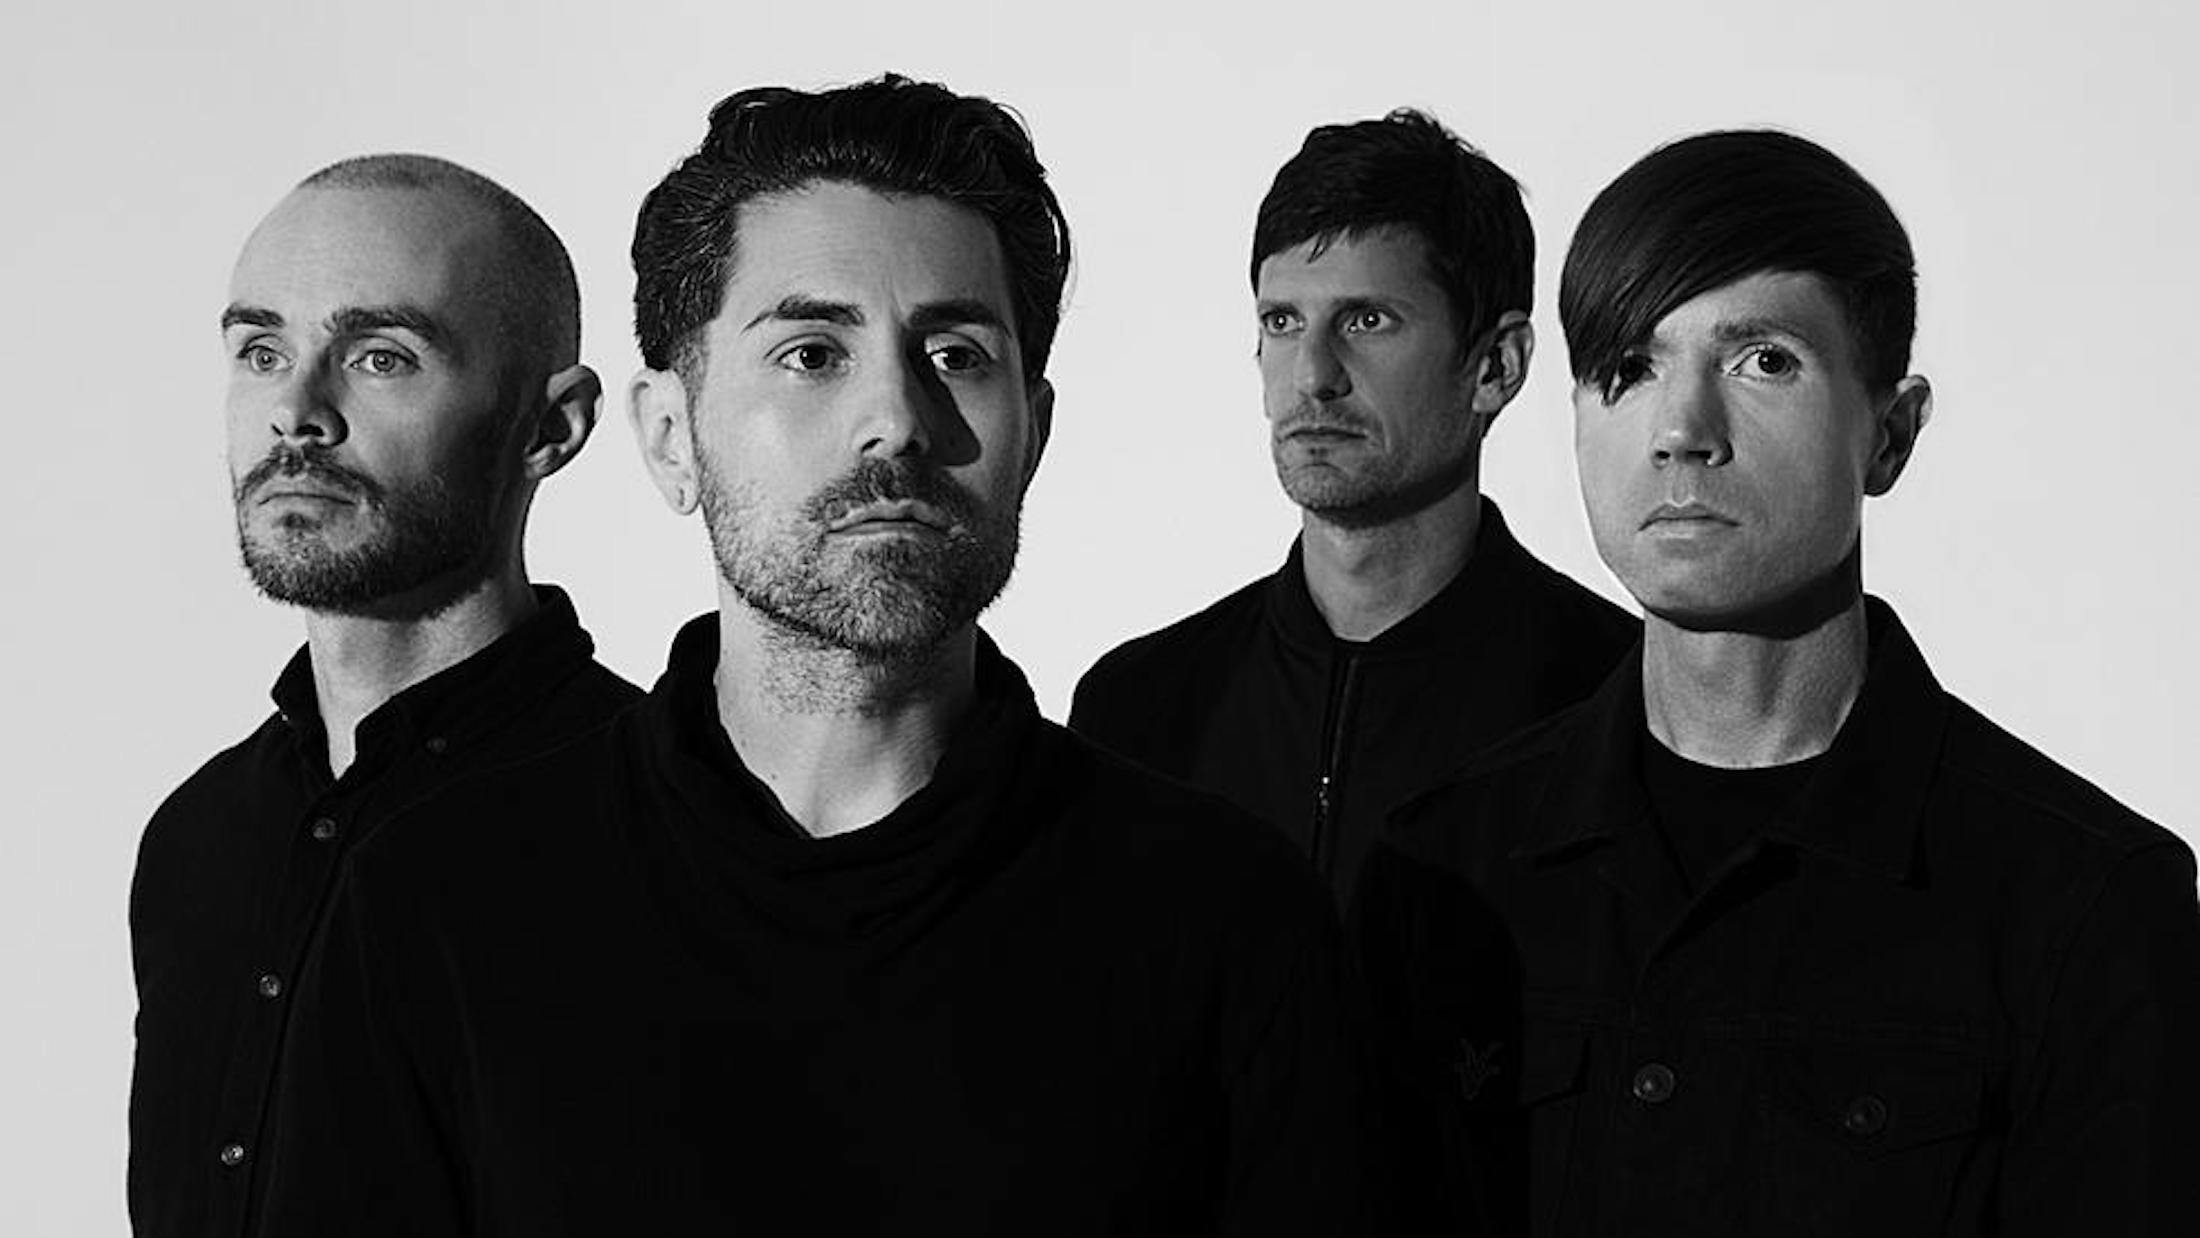 How Do AFI And Thrice Feel About Making Their 2000trees Debut?